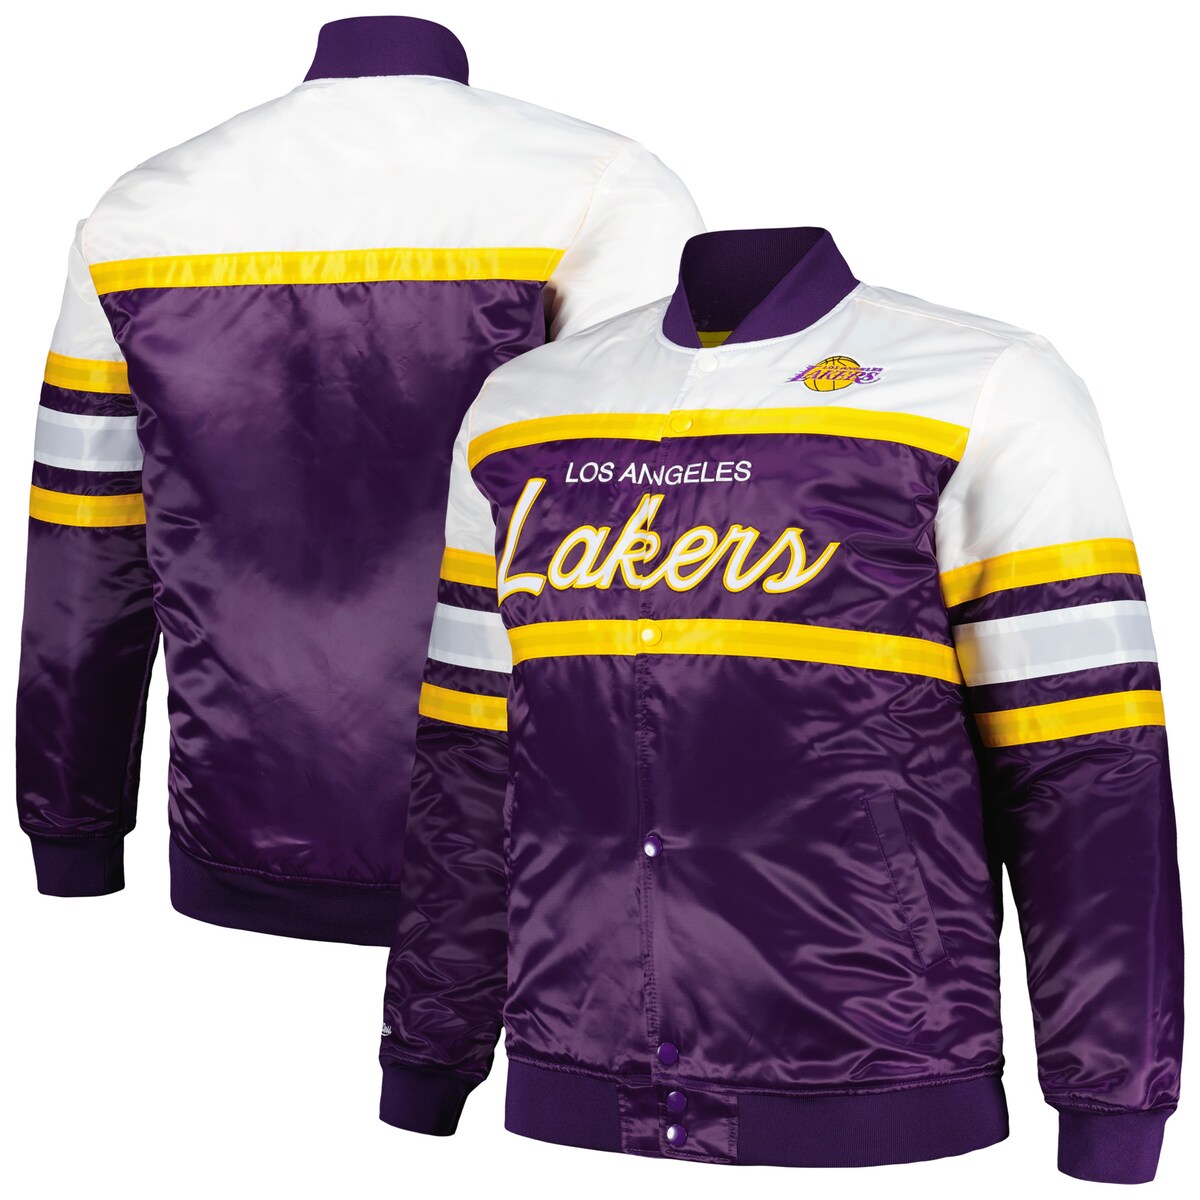 When you need to brave the cold on a Los Angeles Lakers game day, few pieces of gear can match the combination of style and warmth found in this Mitchell & Ness Satin jacket. Equipped with a full-snap closure and cozy quilted lining, it is the perfect heavyweight option to protect you from the elements. Plus, bold colors, sewn-on stripes and embroidered Los Angeles Lakers graphics keep your fandom on display for all to see.Machine wash, tumble dry lowBrand: Mitchell & NessTwo front pocketsSewn-on stripesOfficially licensedImportedOne interior pocketFull SnapLong sleeveQuilted liningMaterial: 100% PolyesterStand-up collarHeavyweight jacket suitable for cold temperaturesEmbroidered fabric applique